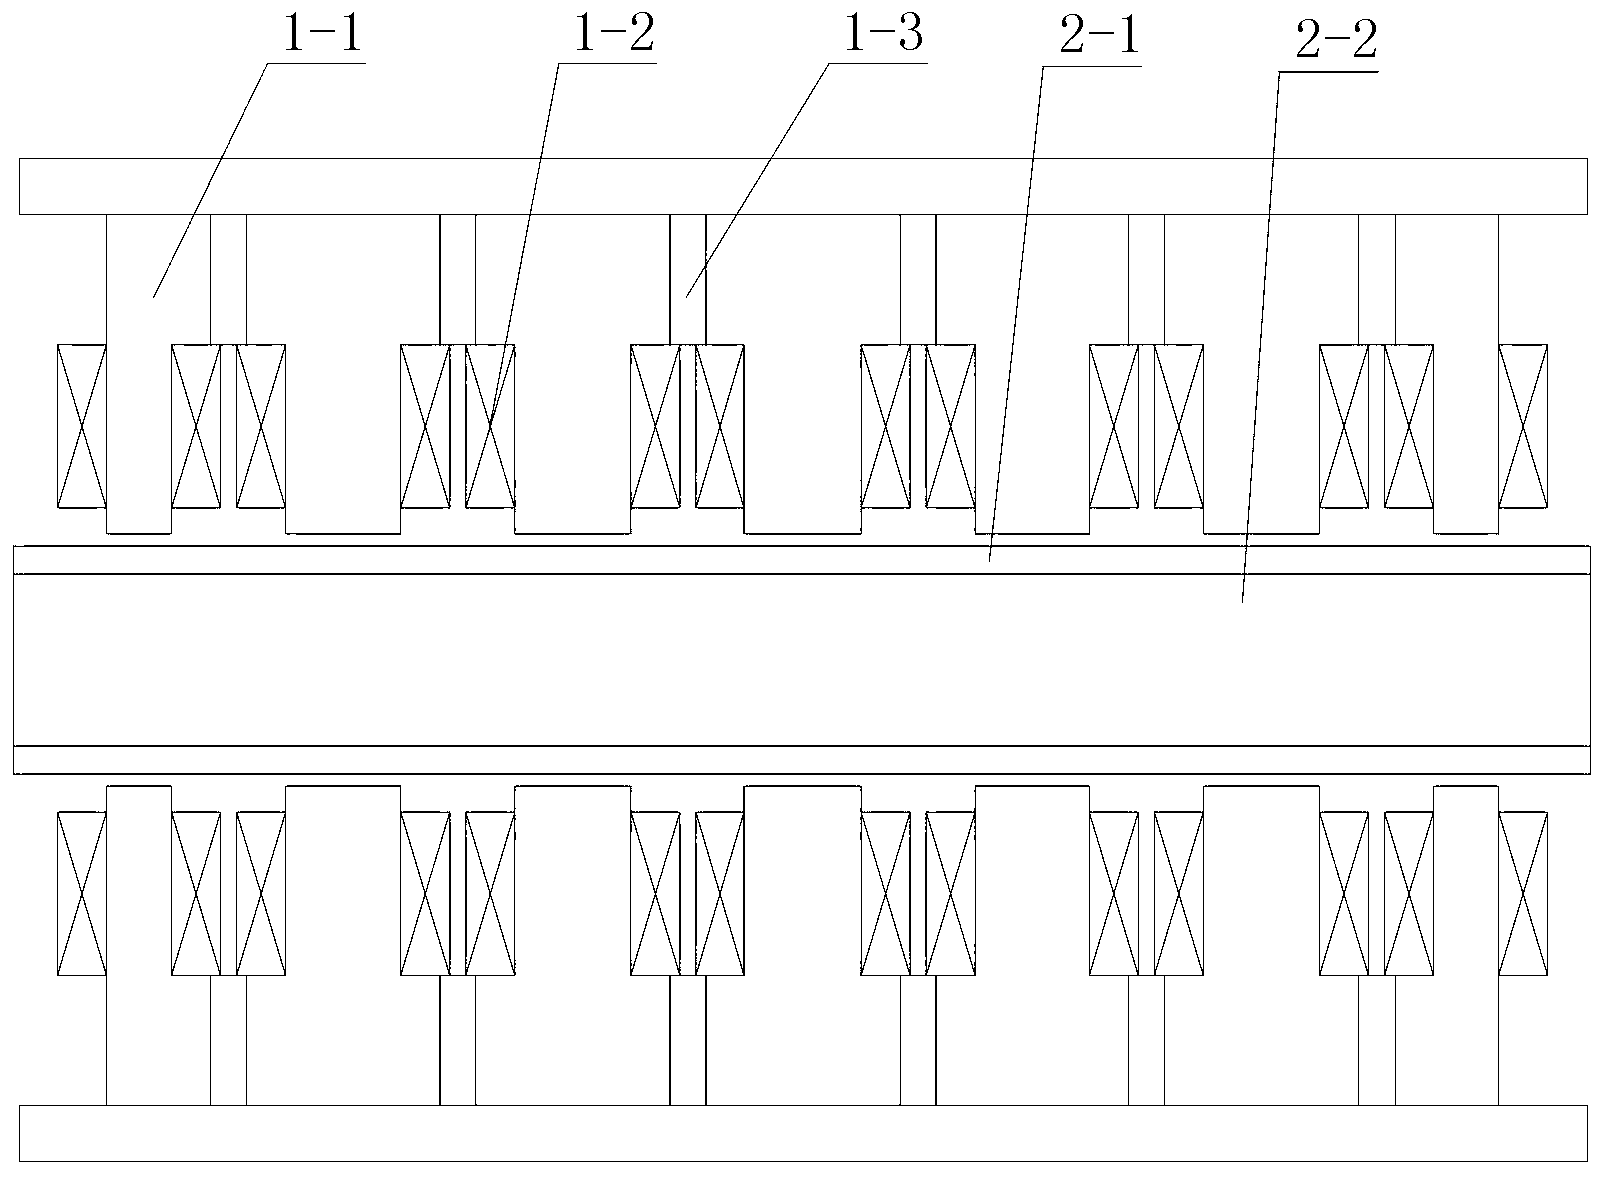 Linear electromagnetic damper with serially-connected magnetic circuit structure